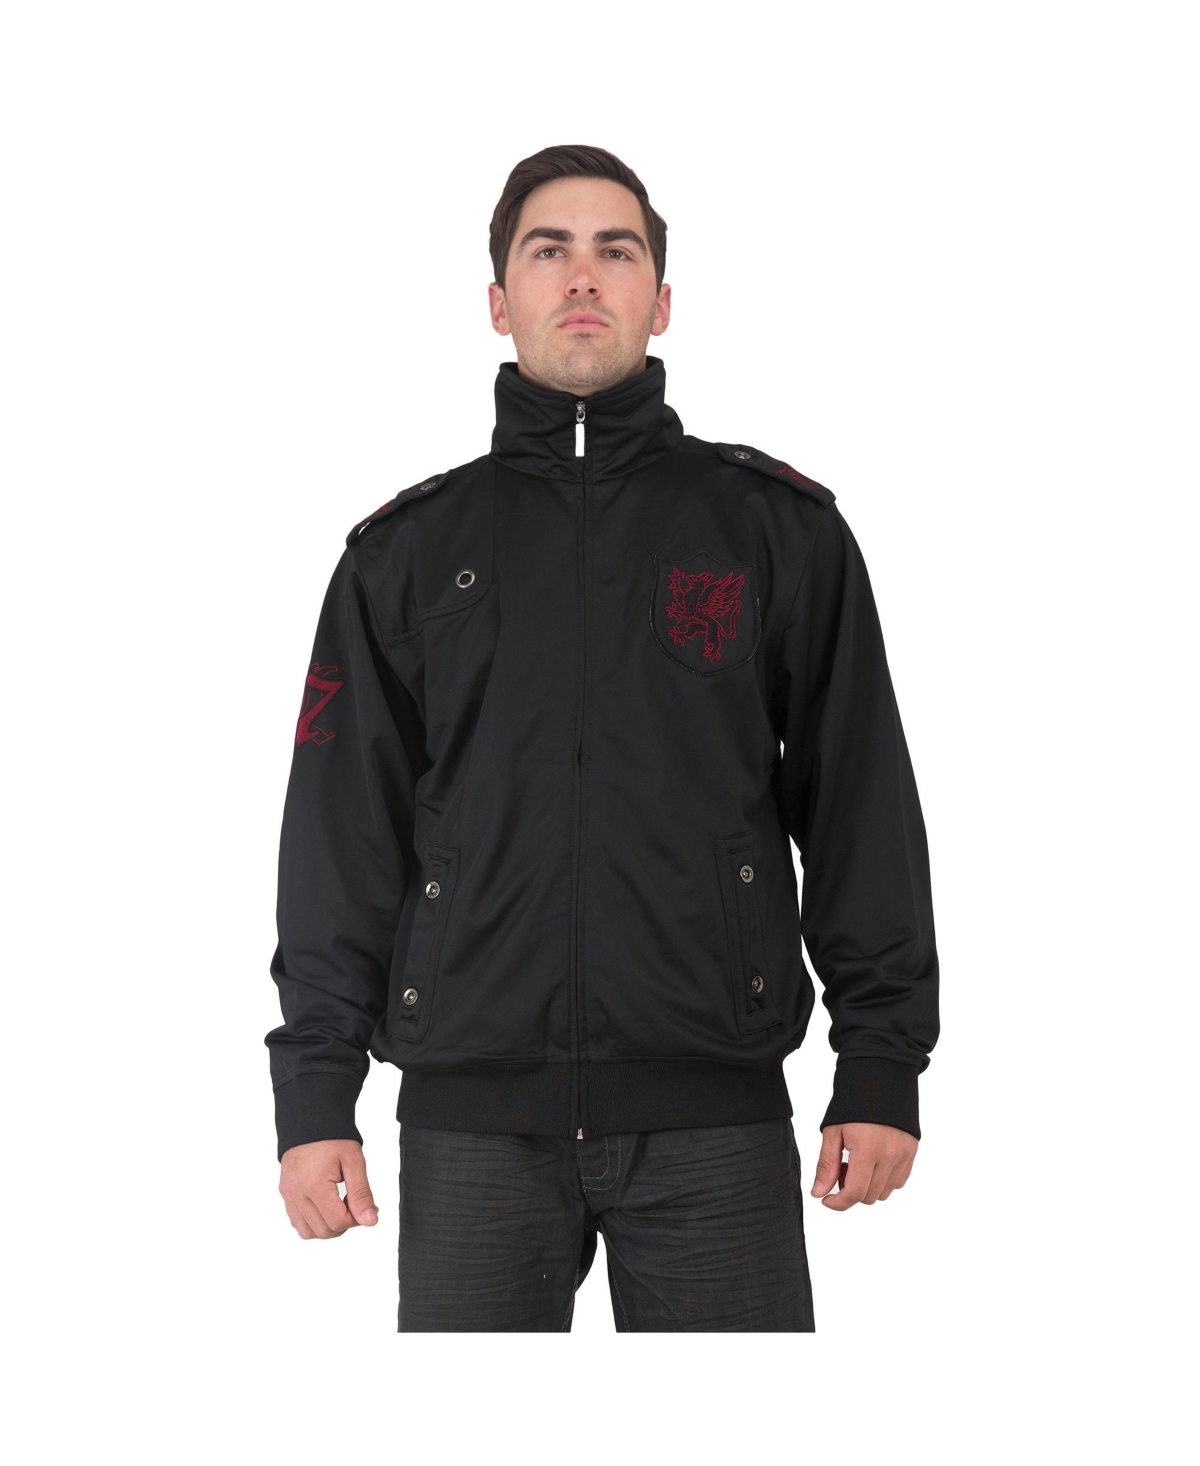 Men's Black Poly Burgundy Embroidery Patches Performance Track Jacket - Black